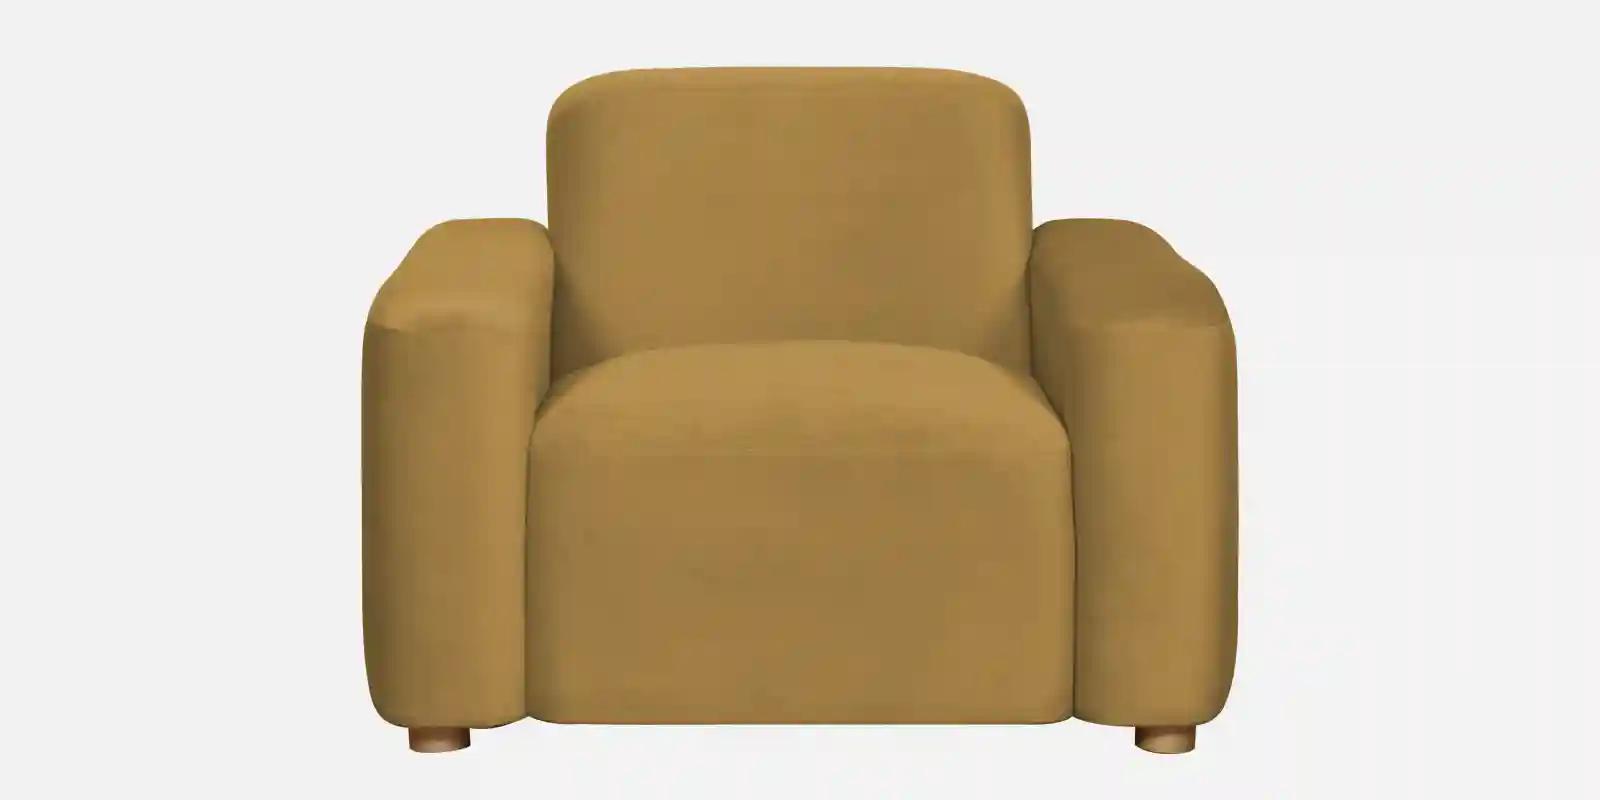 Pine Wood Polyester Fabric Sofa Beige -1 Seater